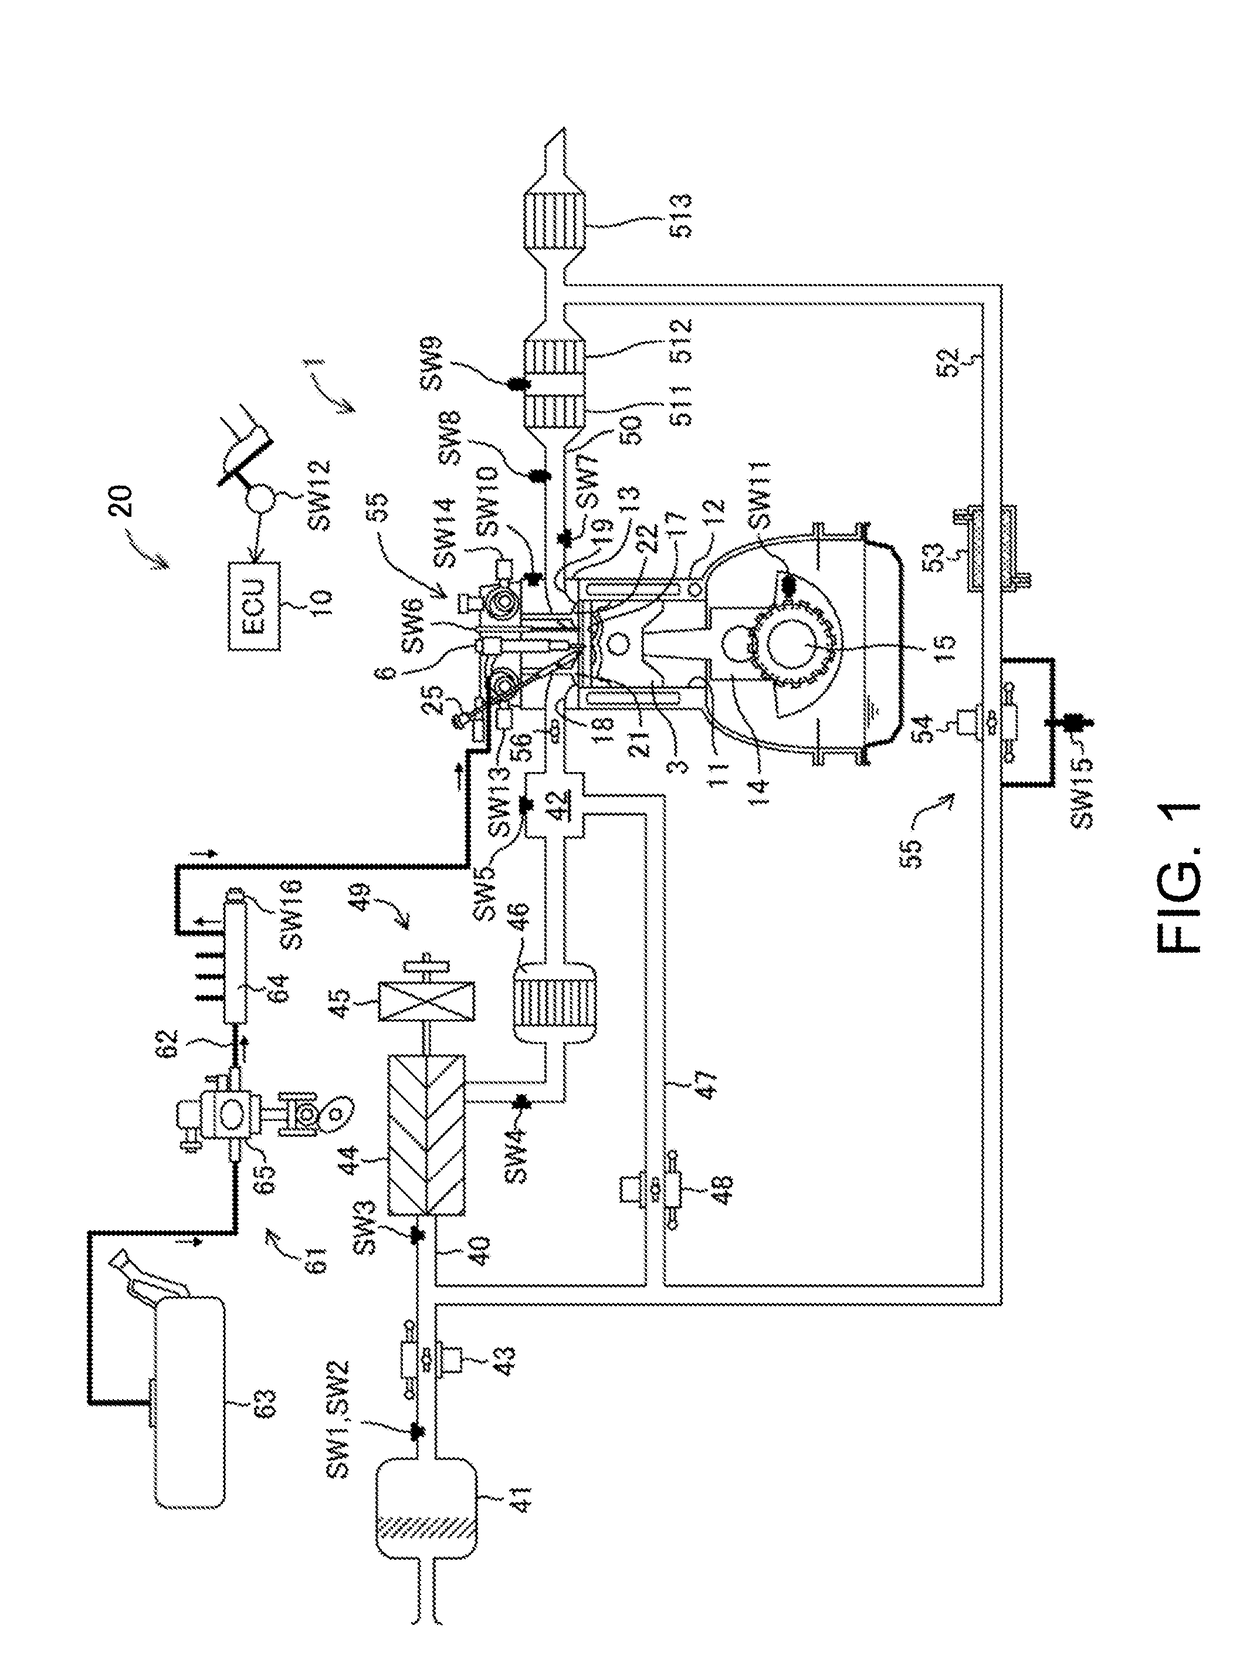 Control system of compression-ignition engine